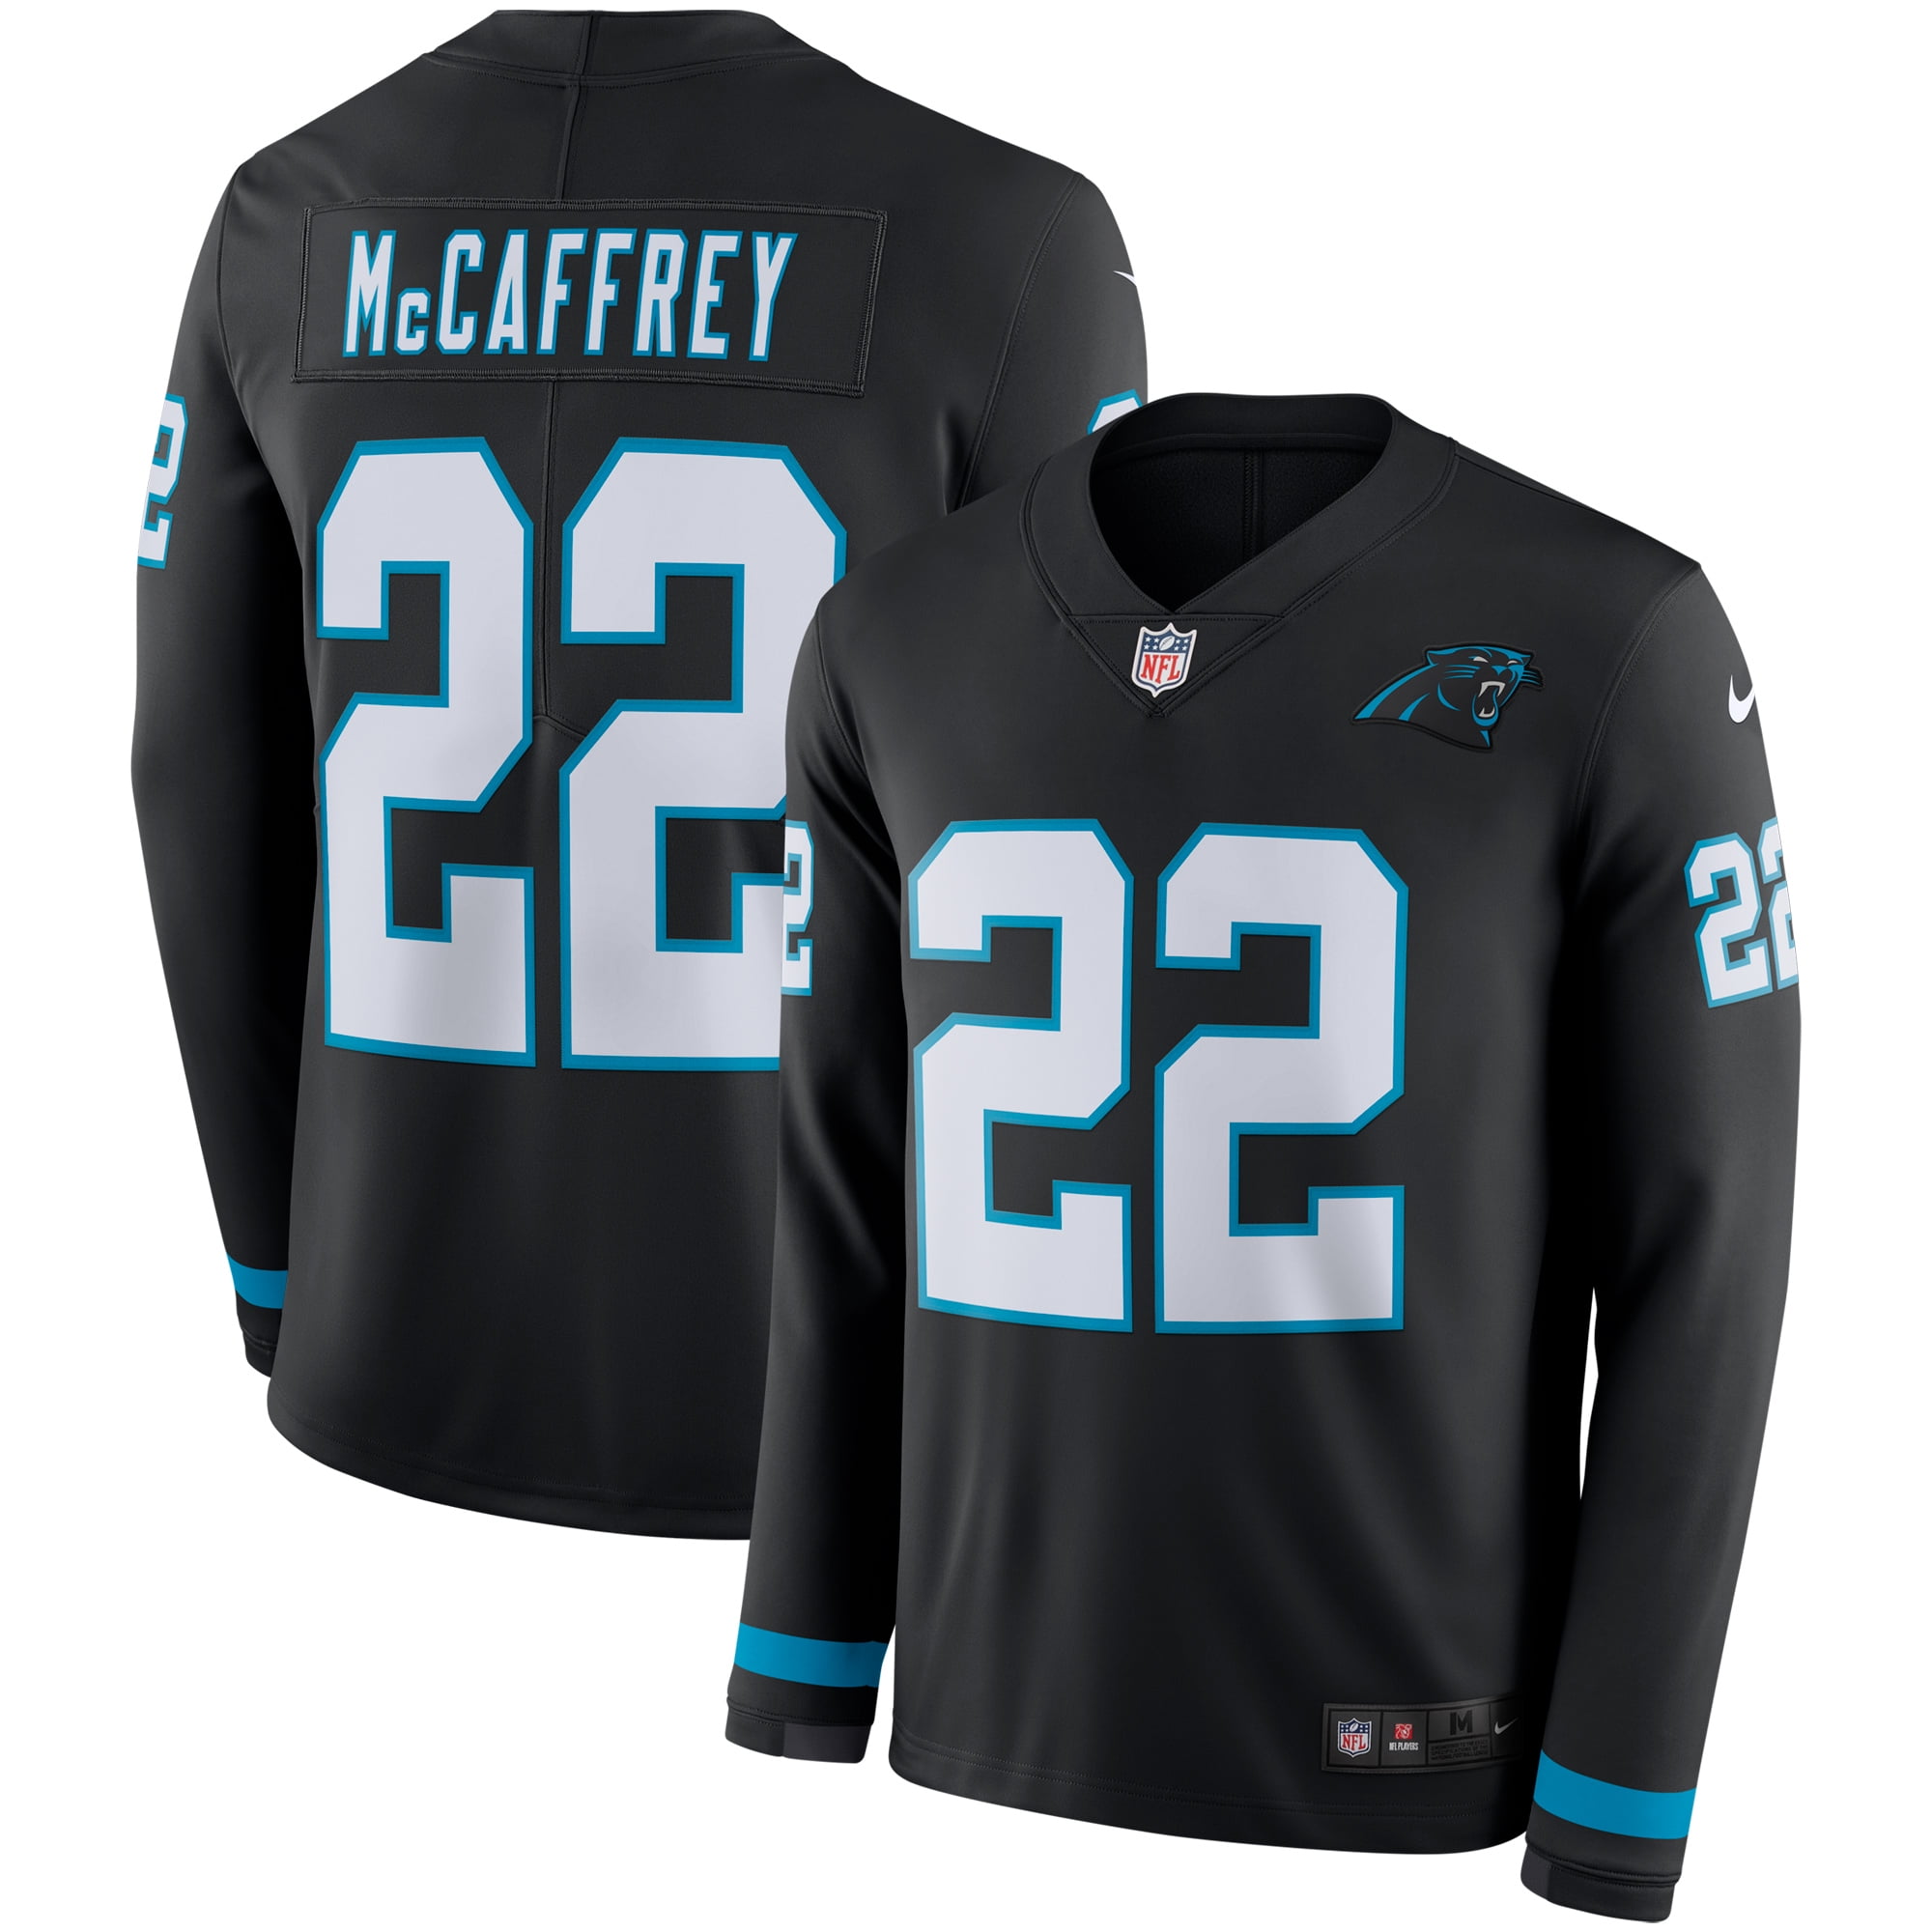 Nike Therma Long Sleeve Player Jersey 